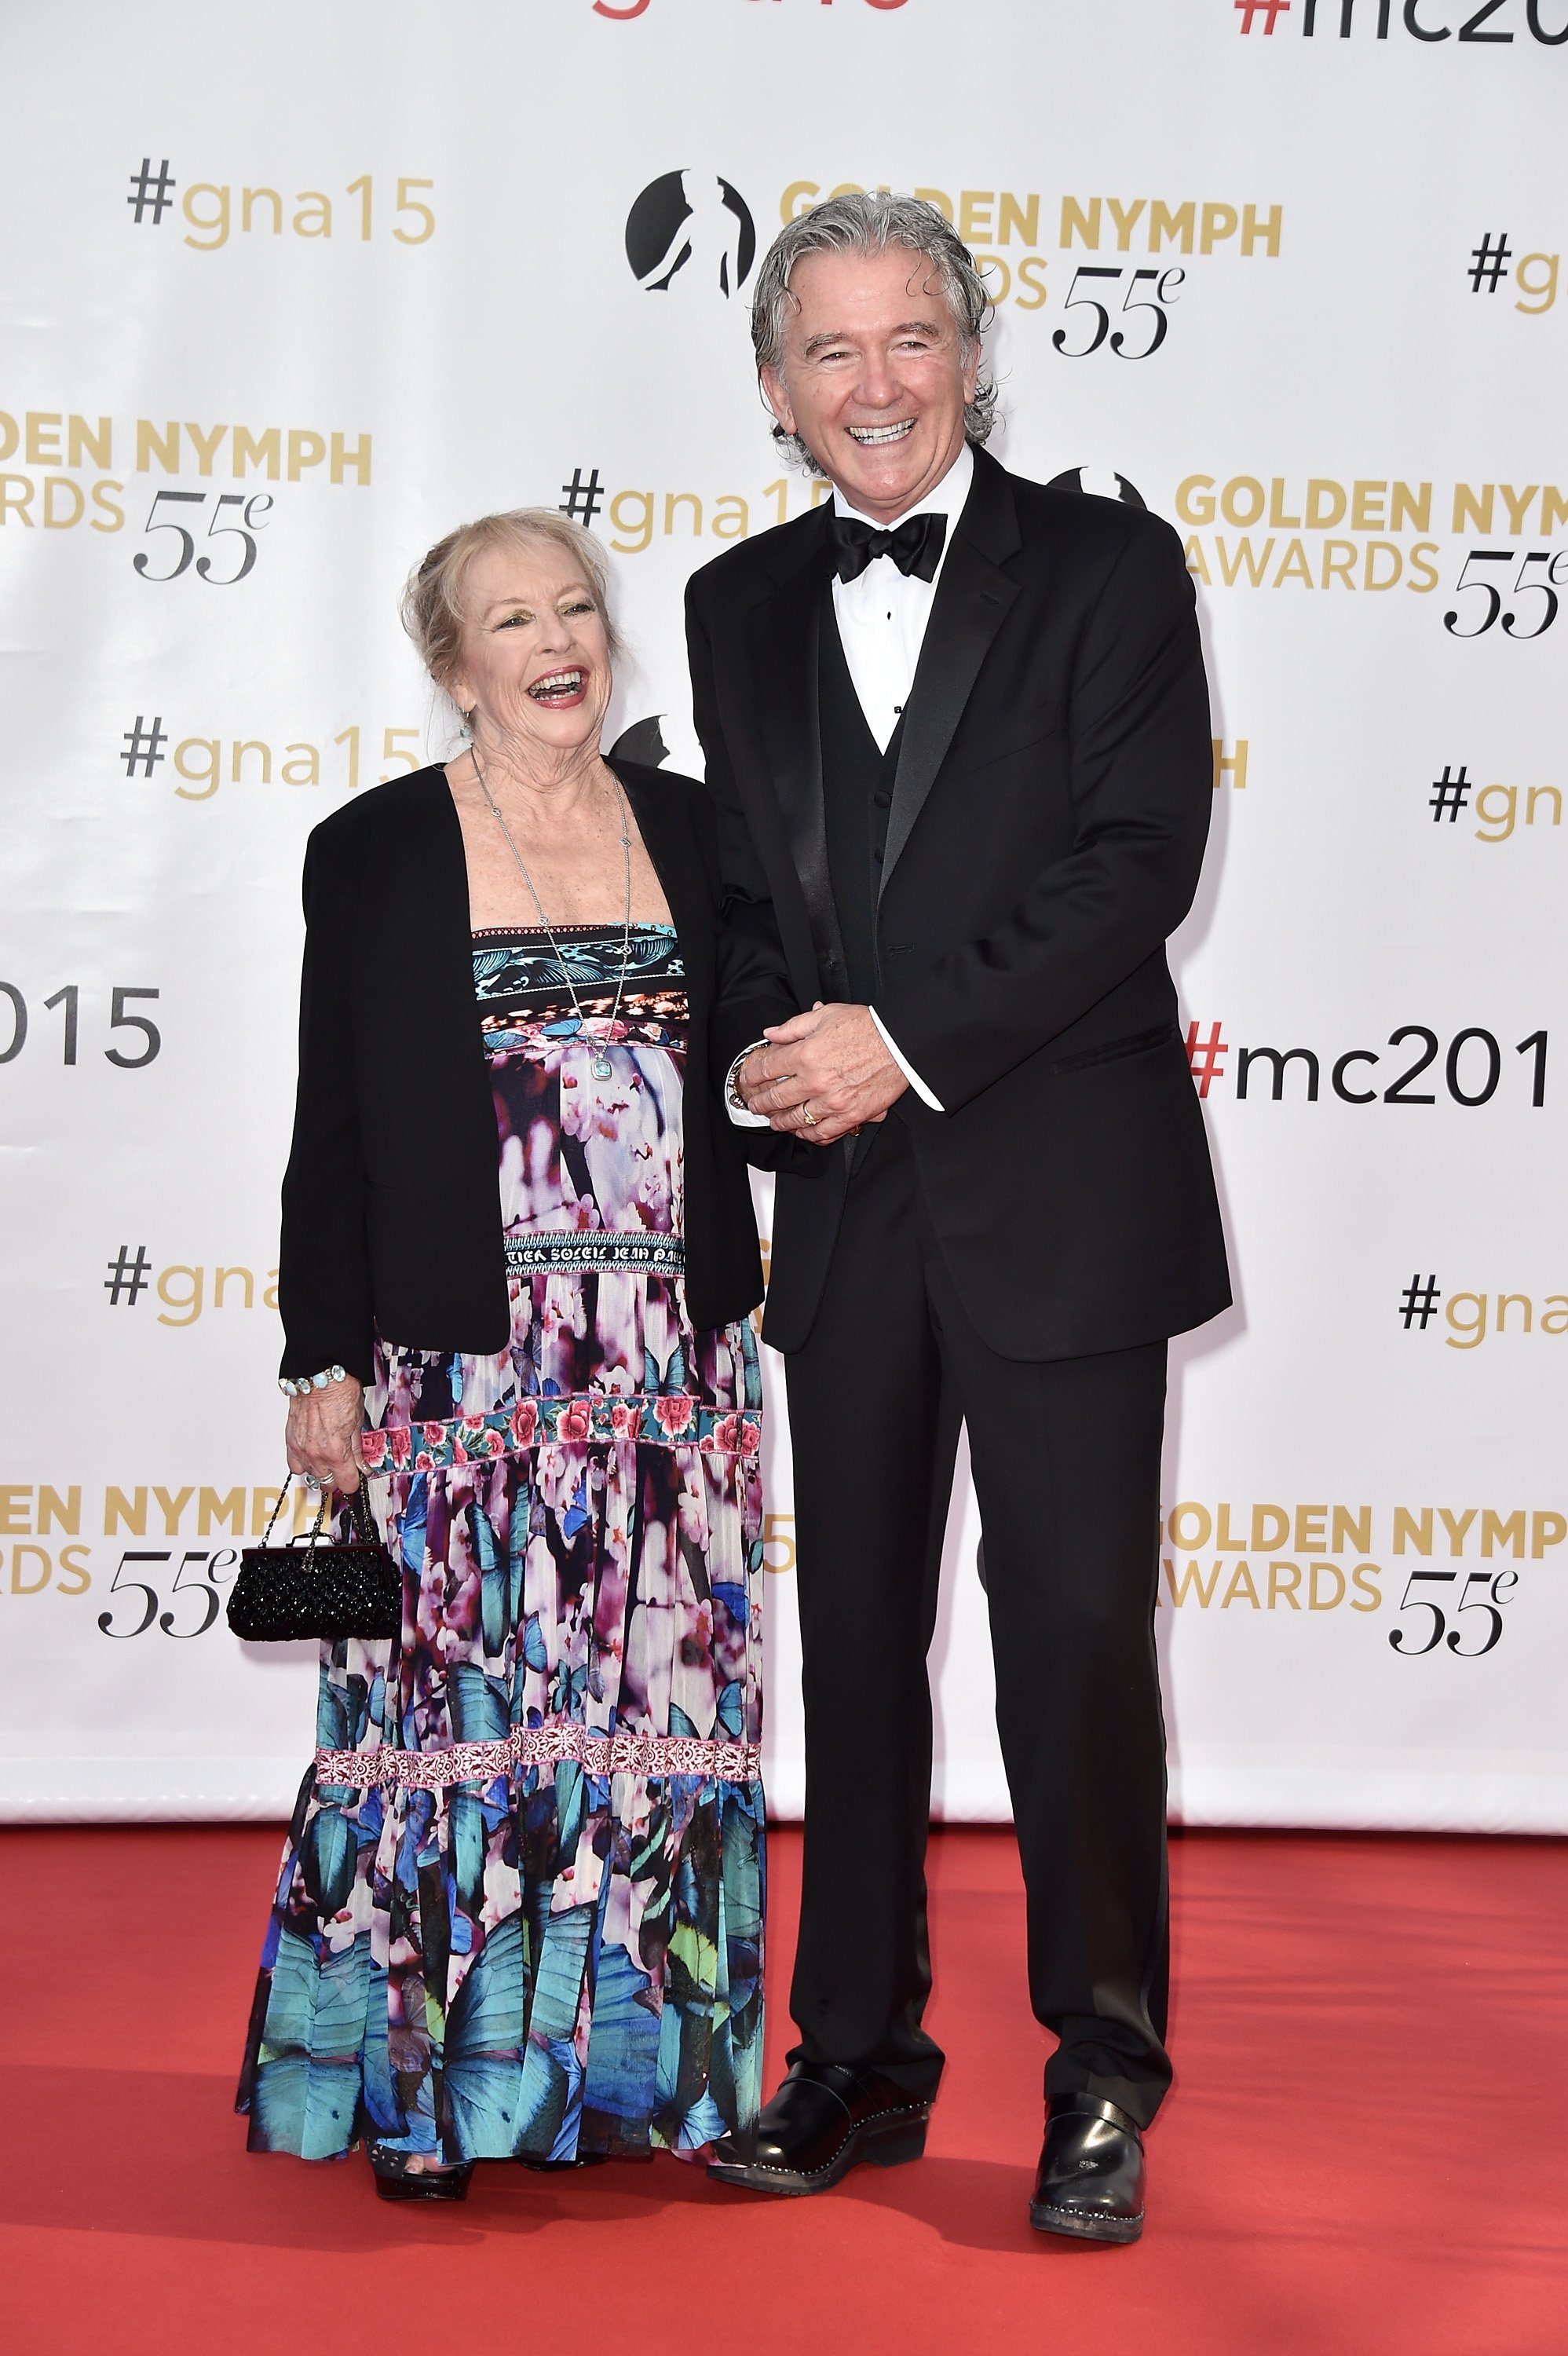 Patrick Duffy and Carlyn Rosser attend the Golden Nymph Awards on June 18, 2015 in Monaco. | Source: Getty Images